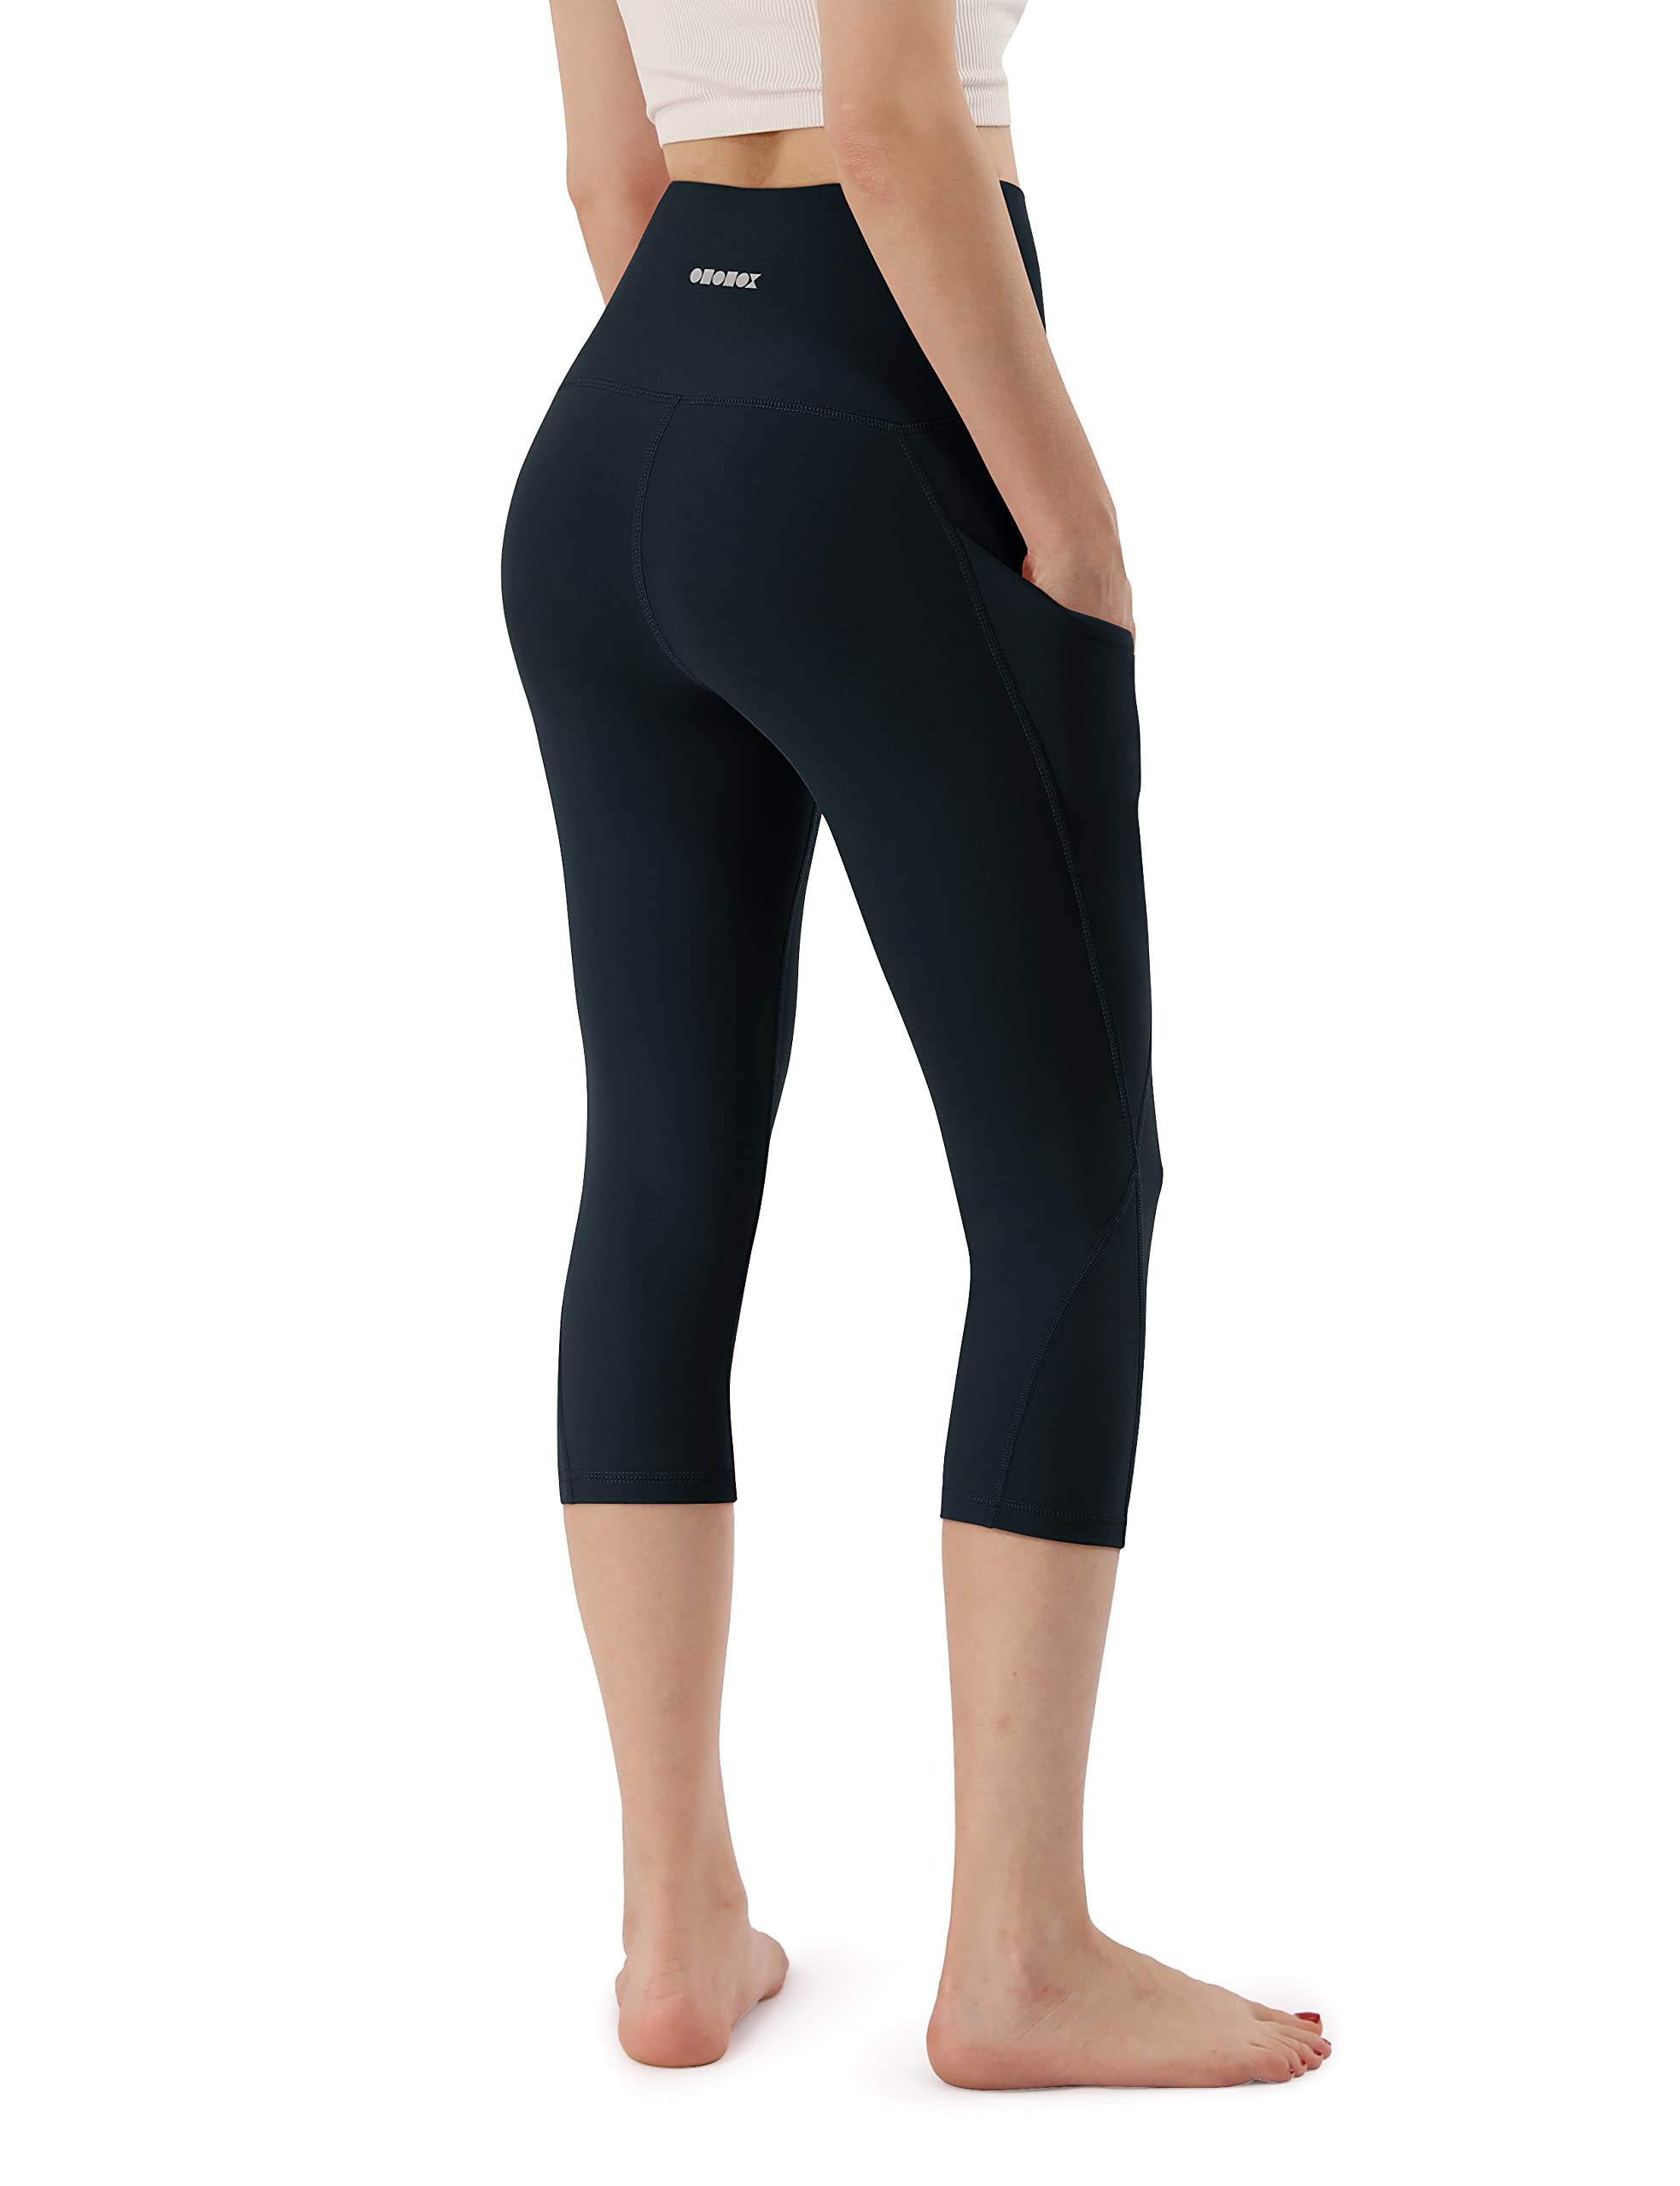 ODODOS Women's High Waisted Yoga Capris with Pockets,Tummy Control Non See Through Workout Sports Running Capri Leggings